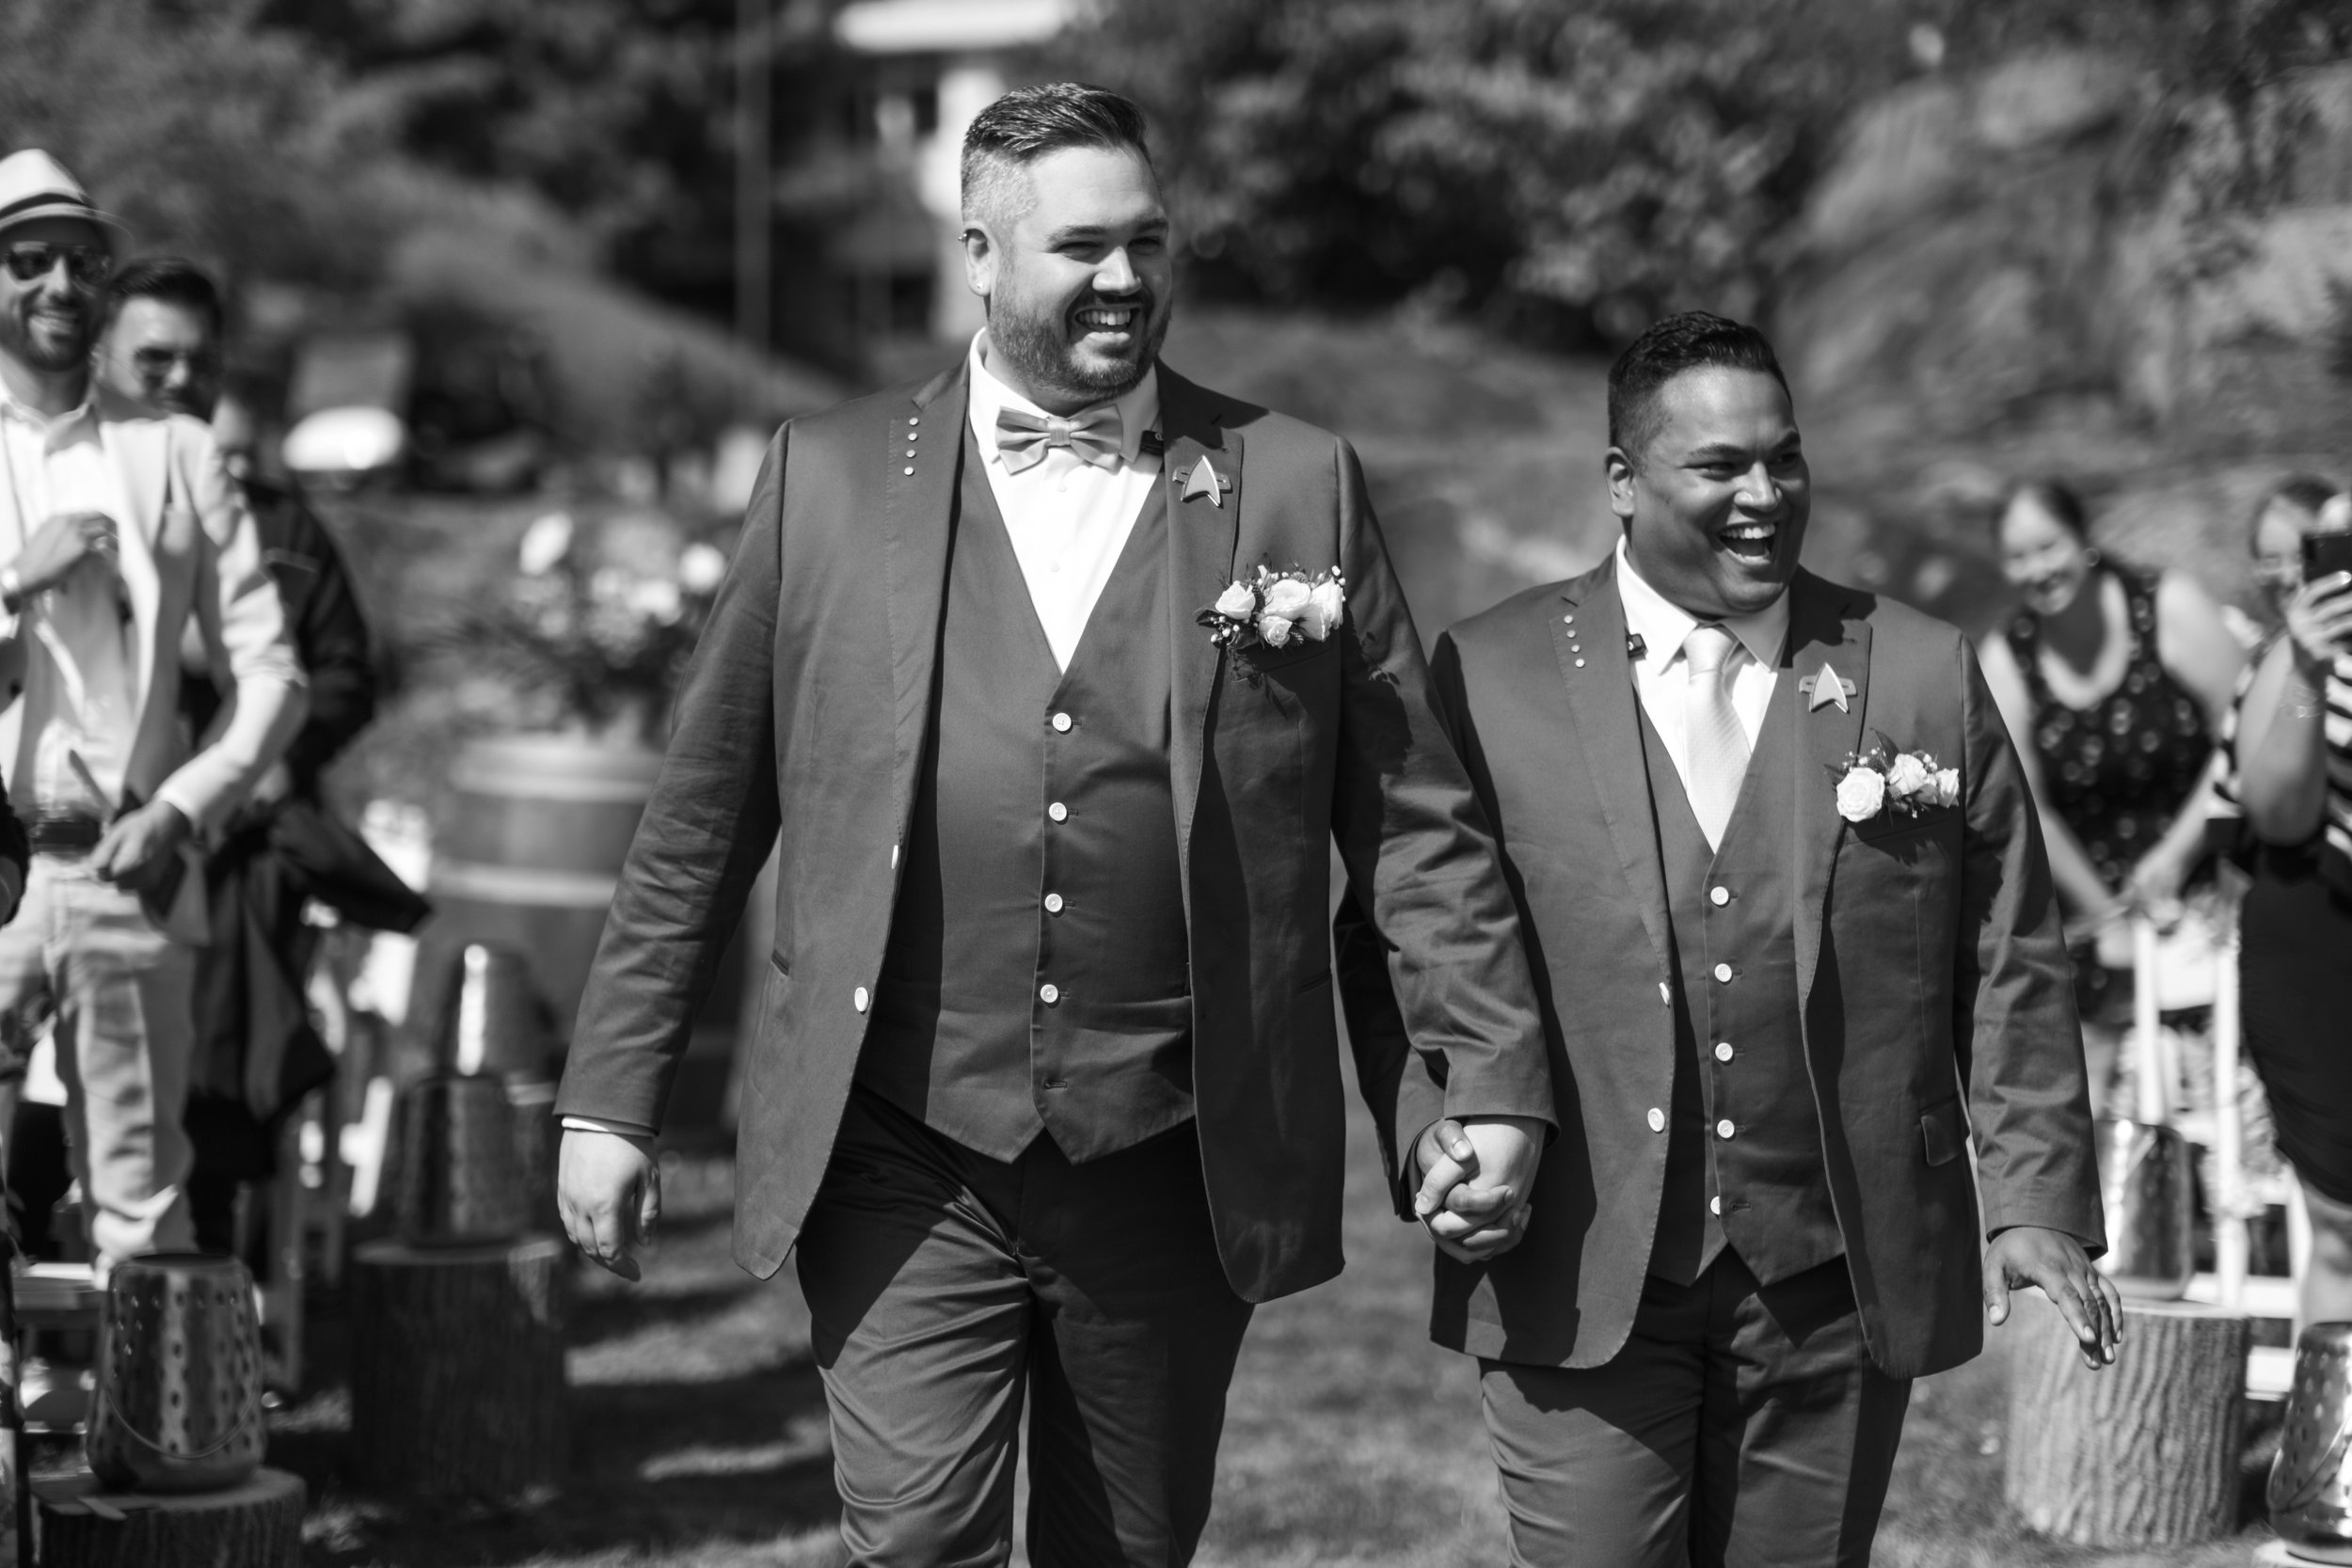  A black and white candid wedding photograph of Bryan + Adam walking down the aisle during their  outdoor wedding cermony  at the JW Marriot The Rosseau in Muskoka by Toronto wedding photographer Scott Williams (www.scottwilliamsphotographer.com) 